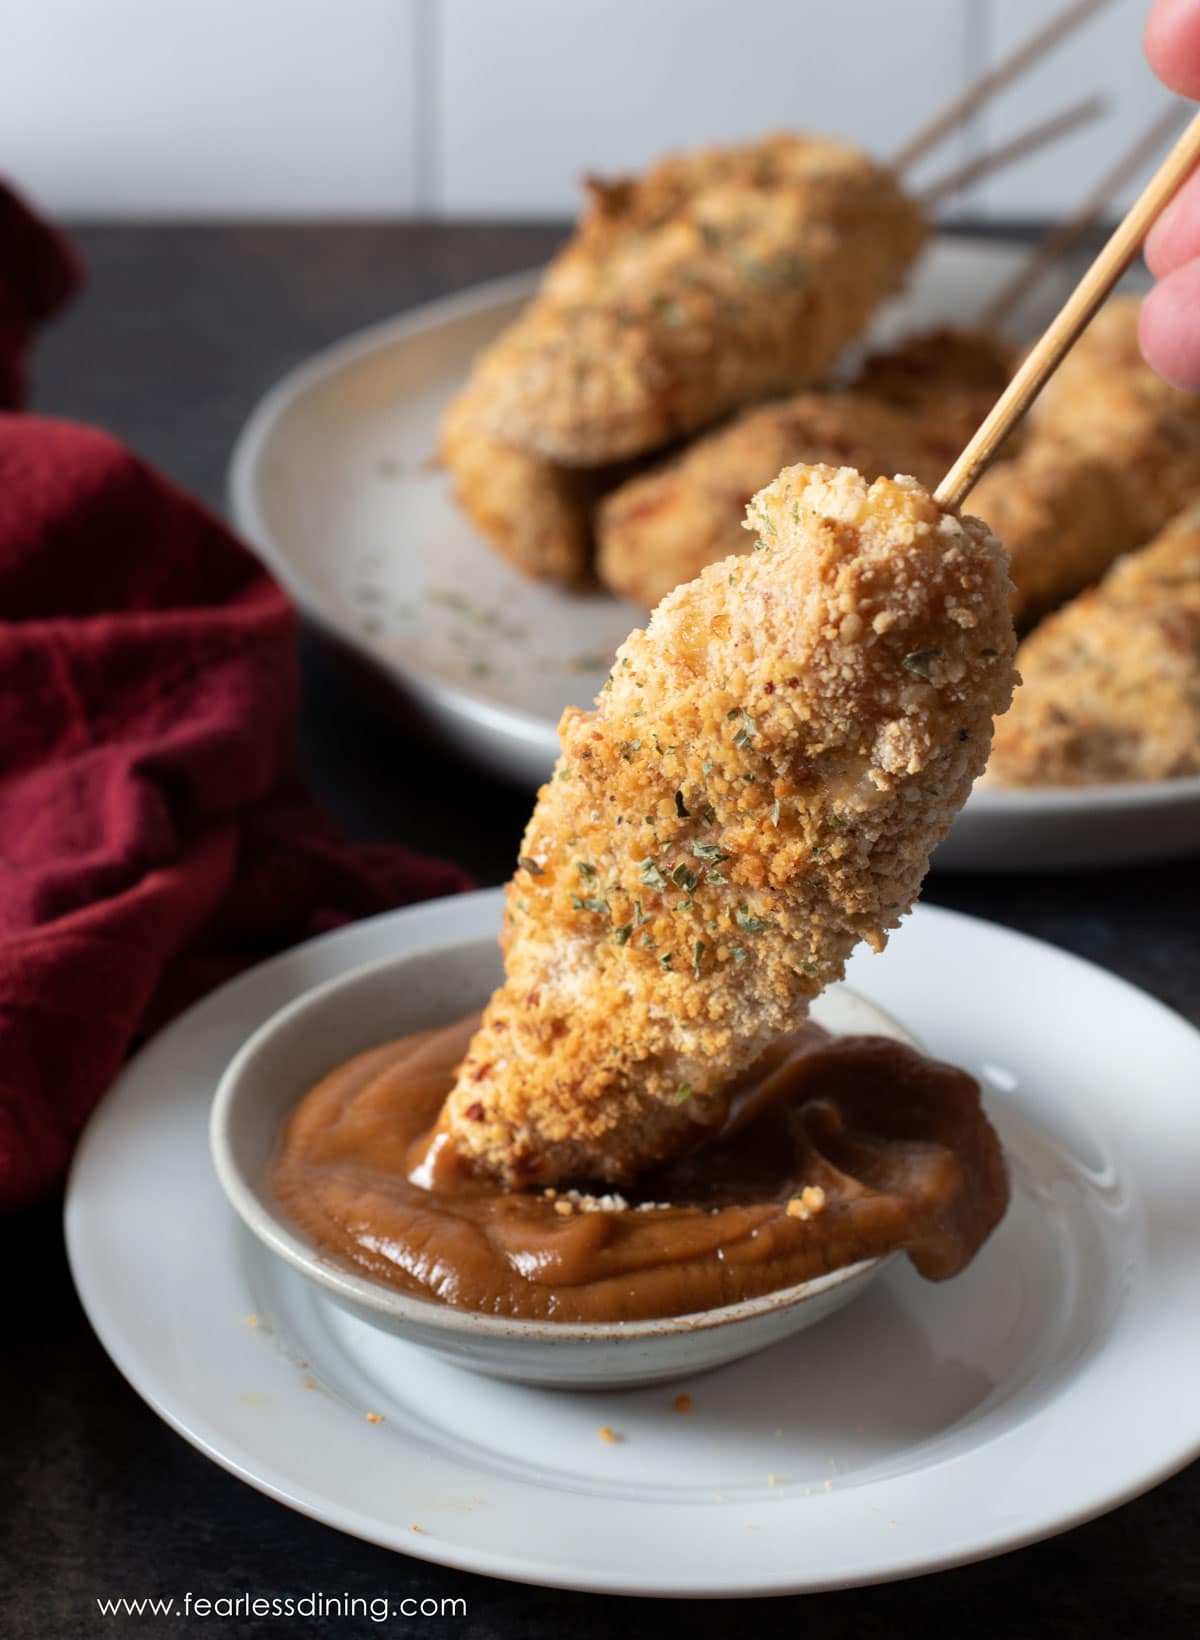 Dipping a chicken satay in peanut sauce.